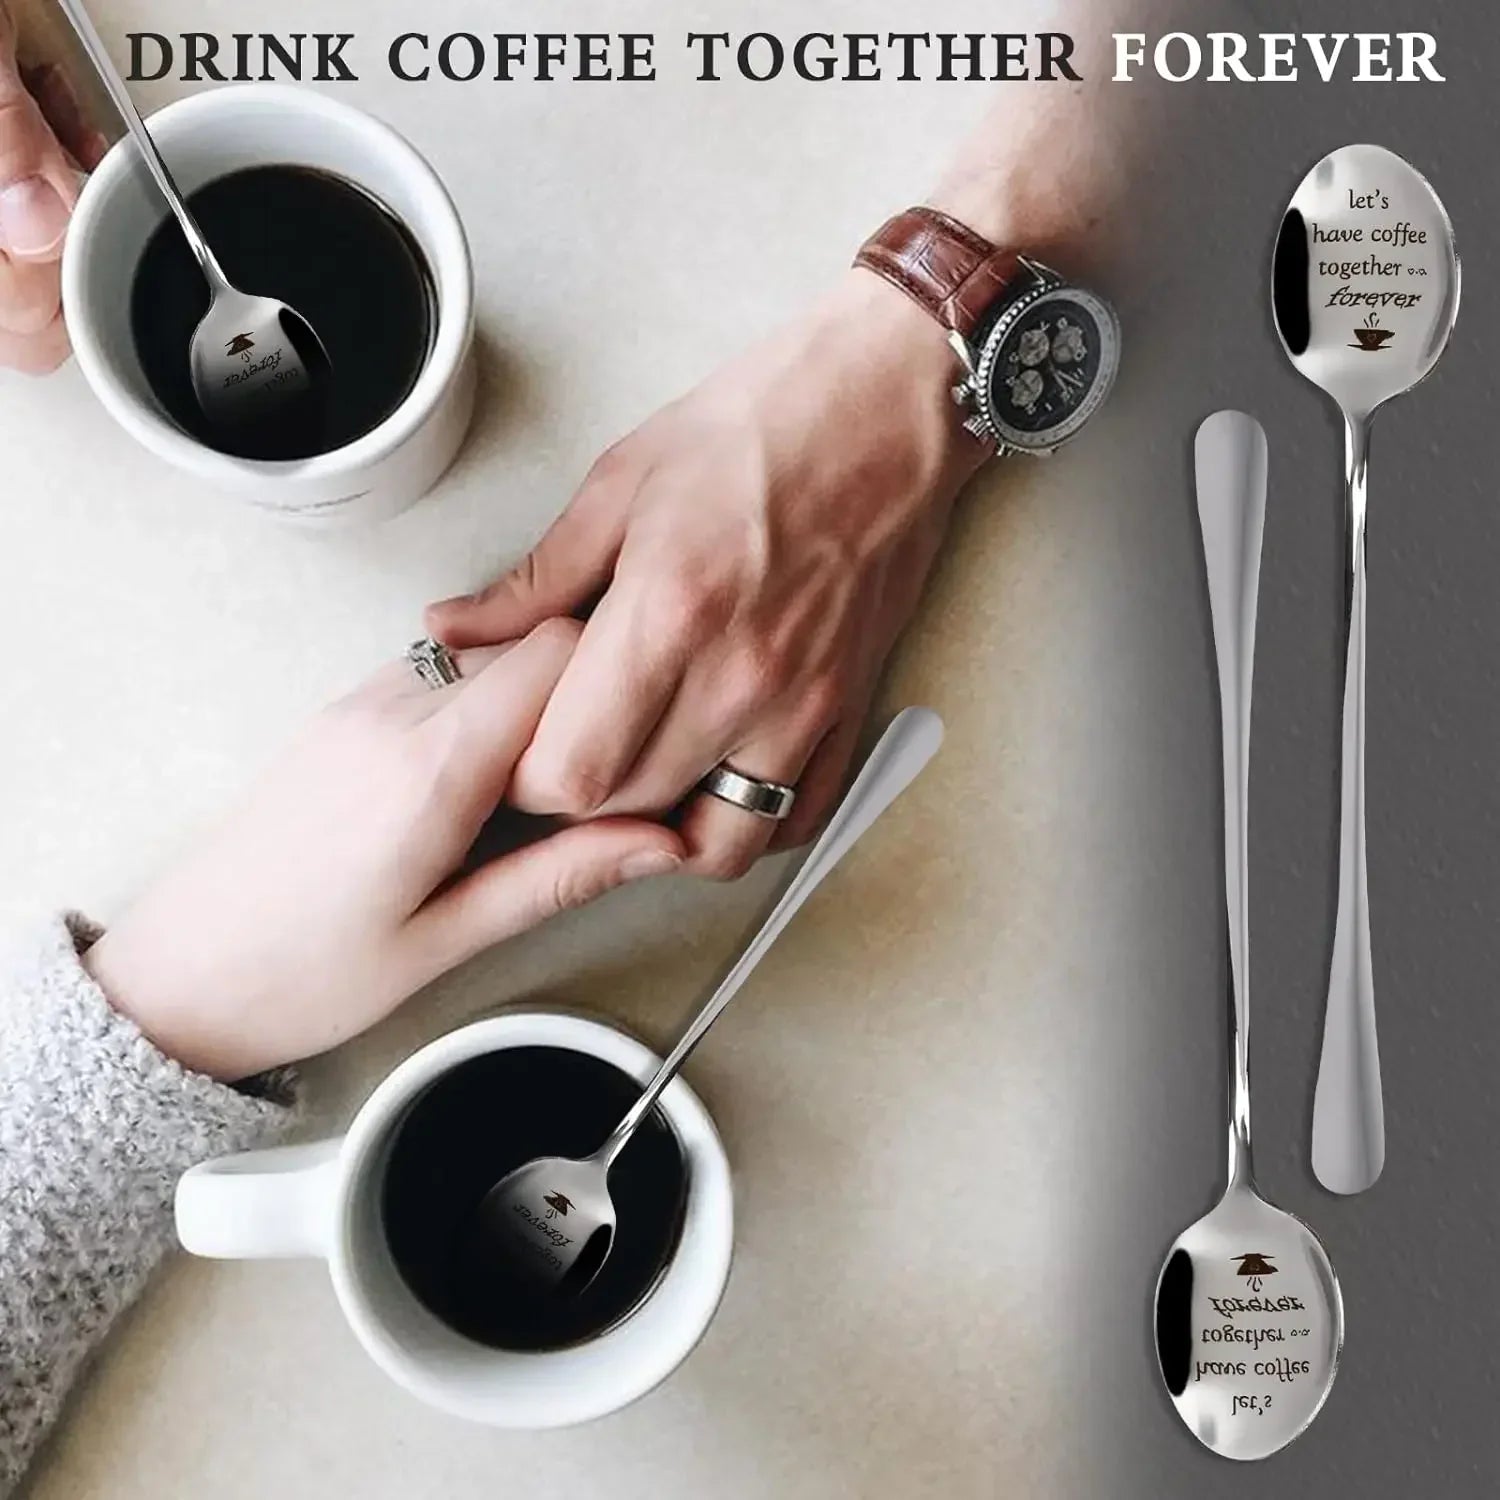 Engraved Love Note Stainless Steel Coffee Spoons - Unique Wedding Favors